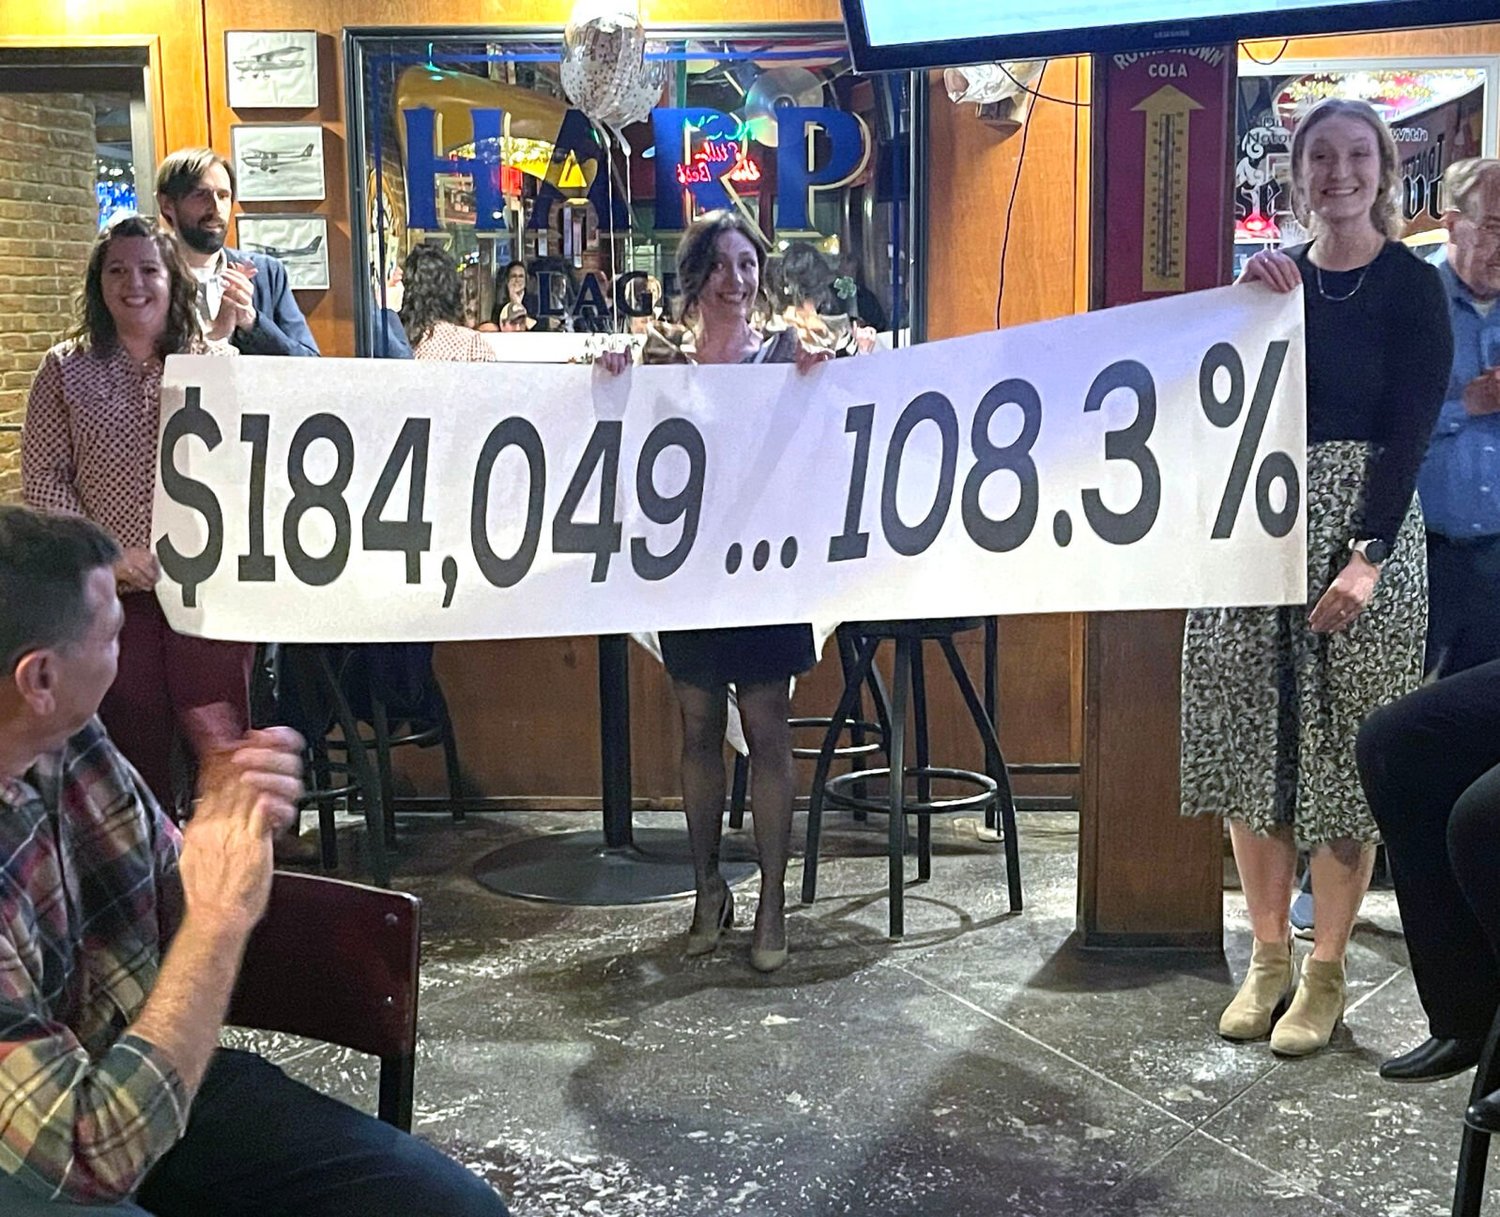 The United Way exceeded their goal of $170,000 by bringing in $184,049 or 108.3 percent of their goal. 